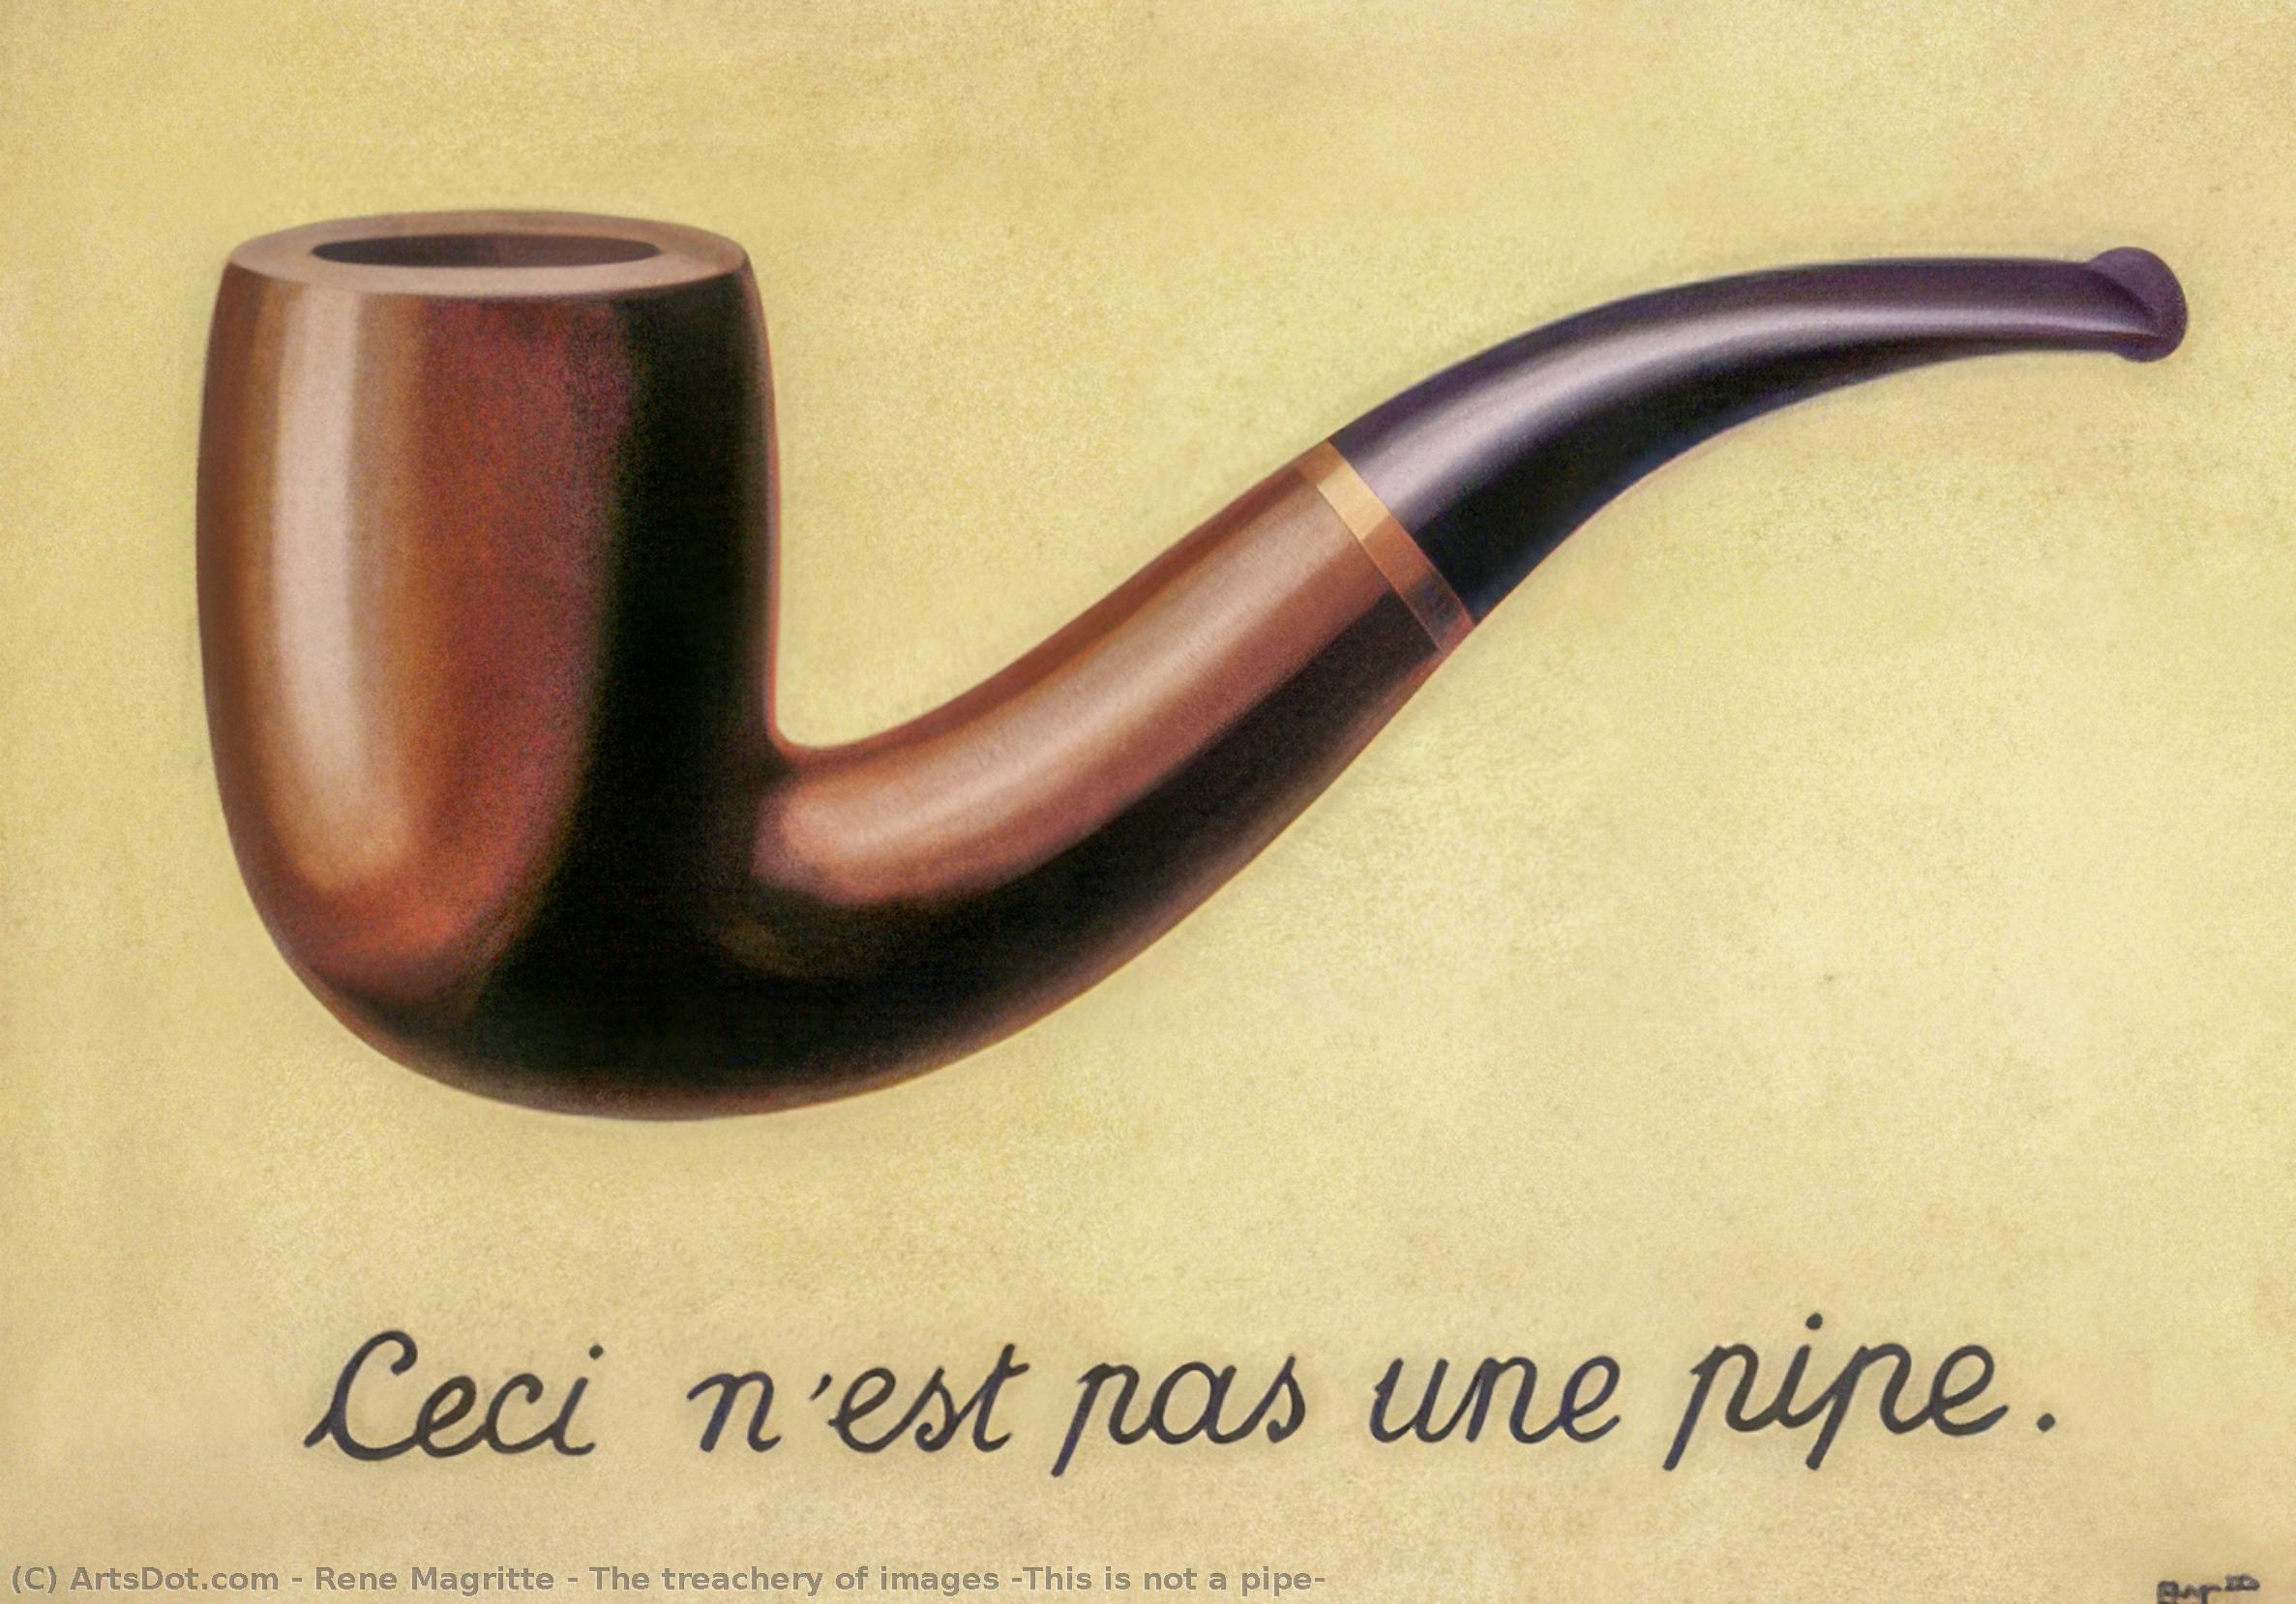 WikiOO.org - 백과 사전 - 회화, 삽화 Rene Magritte - The treachery of images (This is not a pipe)